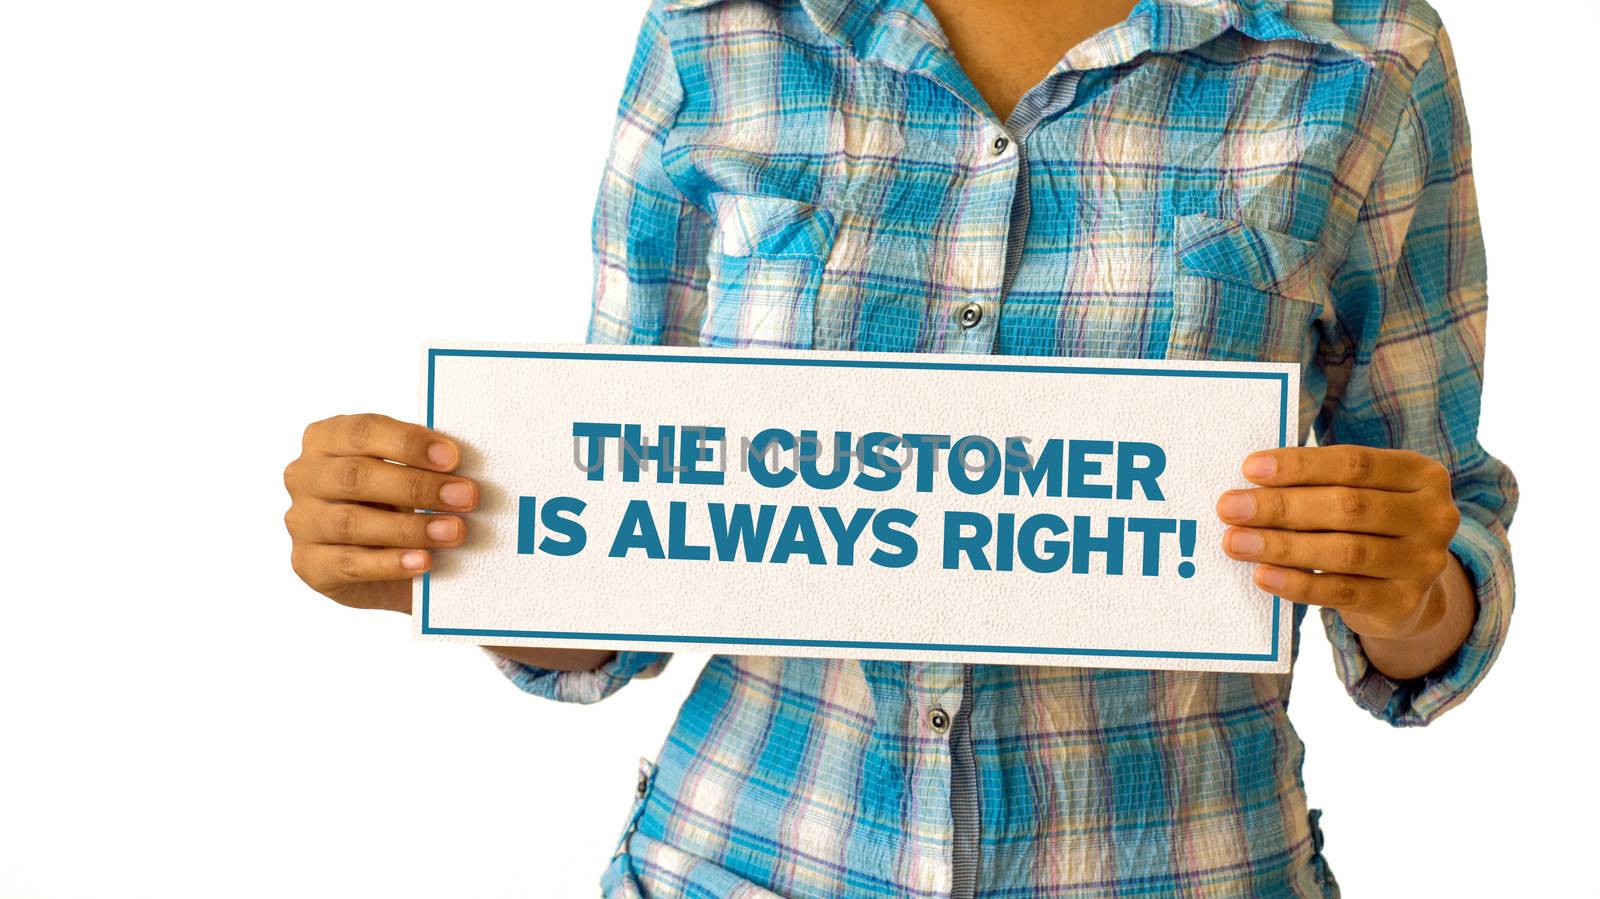 A woman holding a The customer is always right sign.